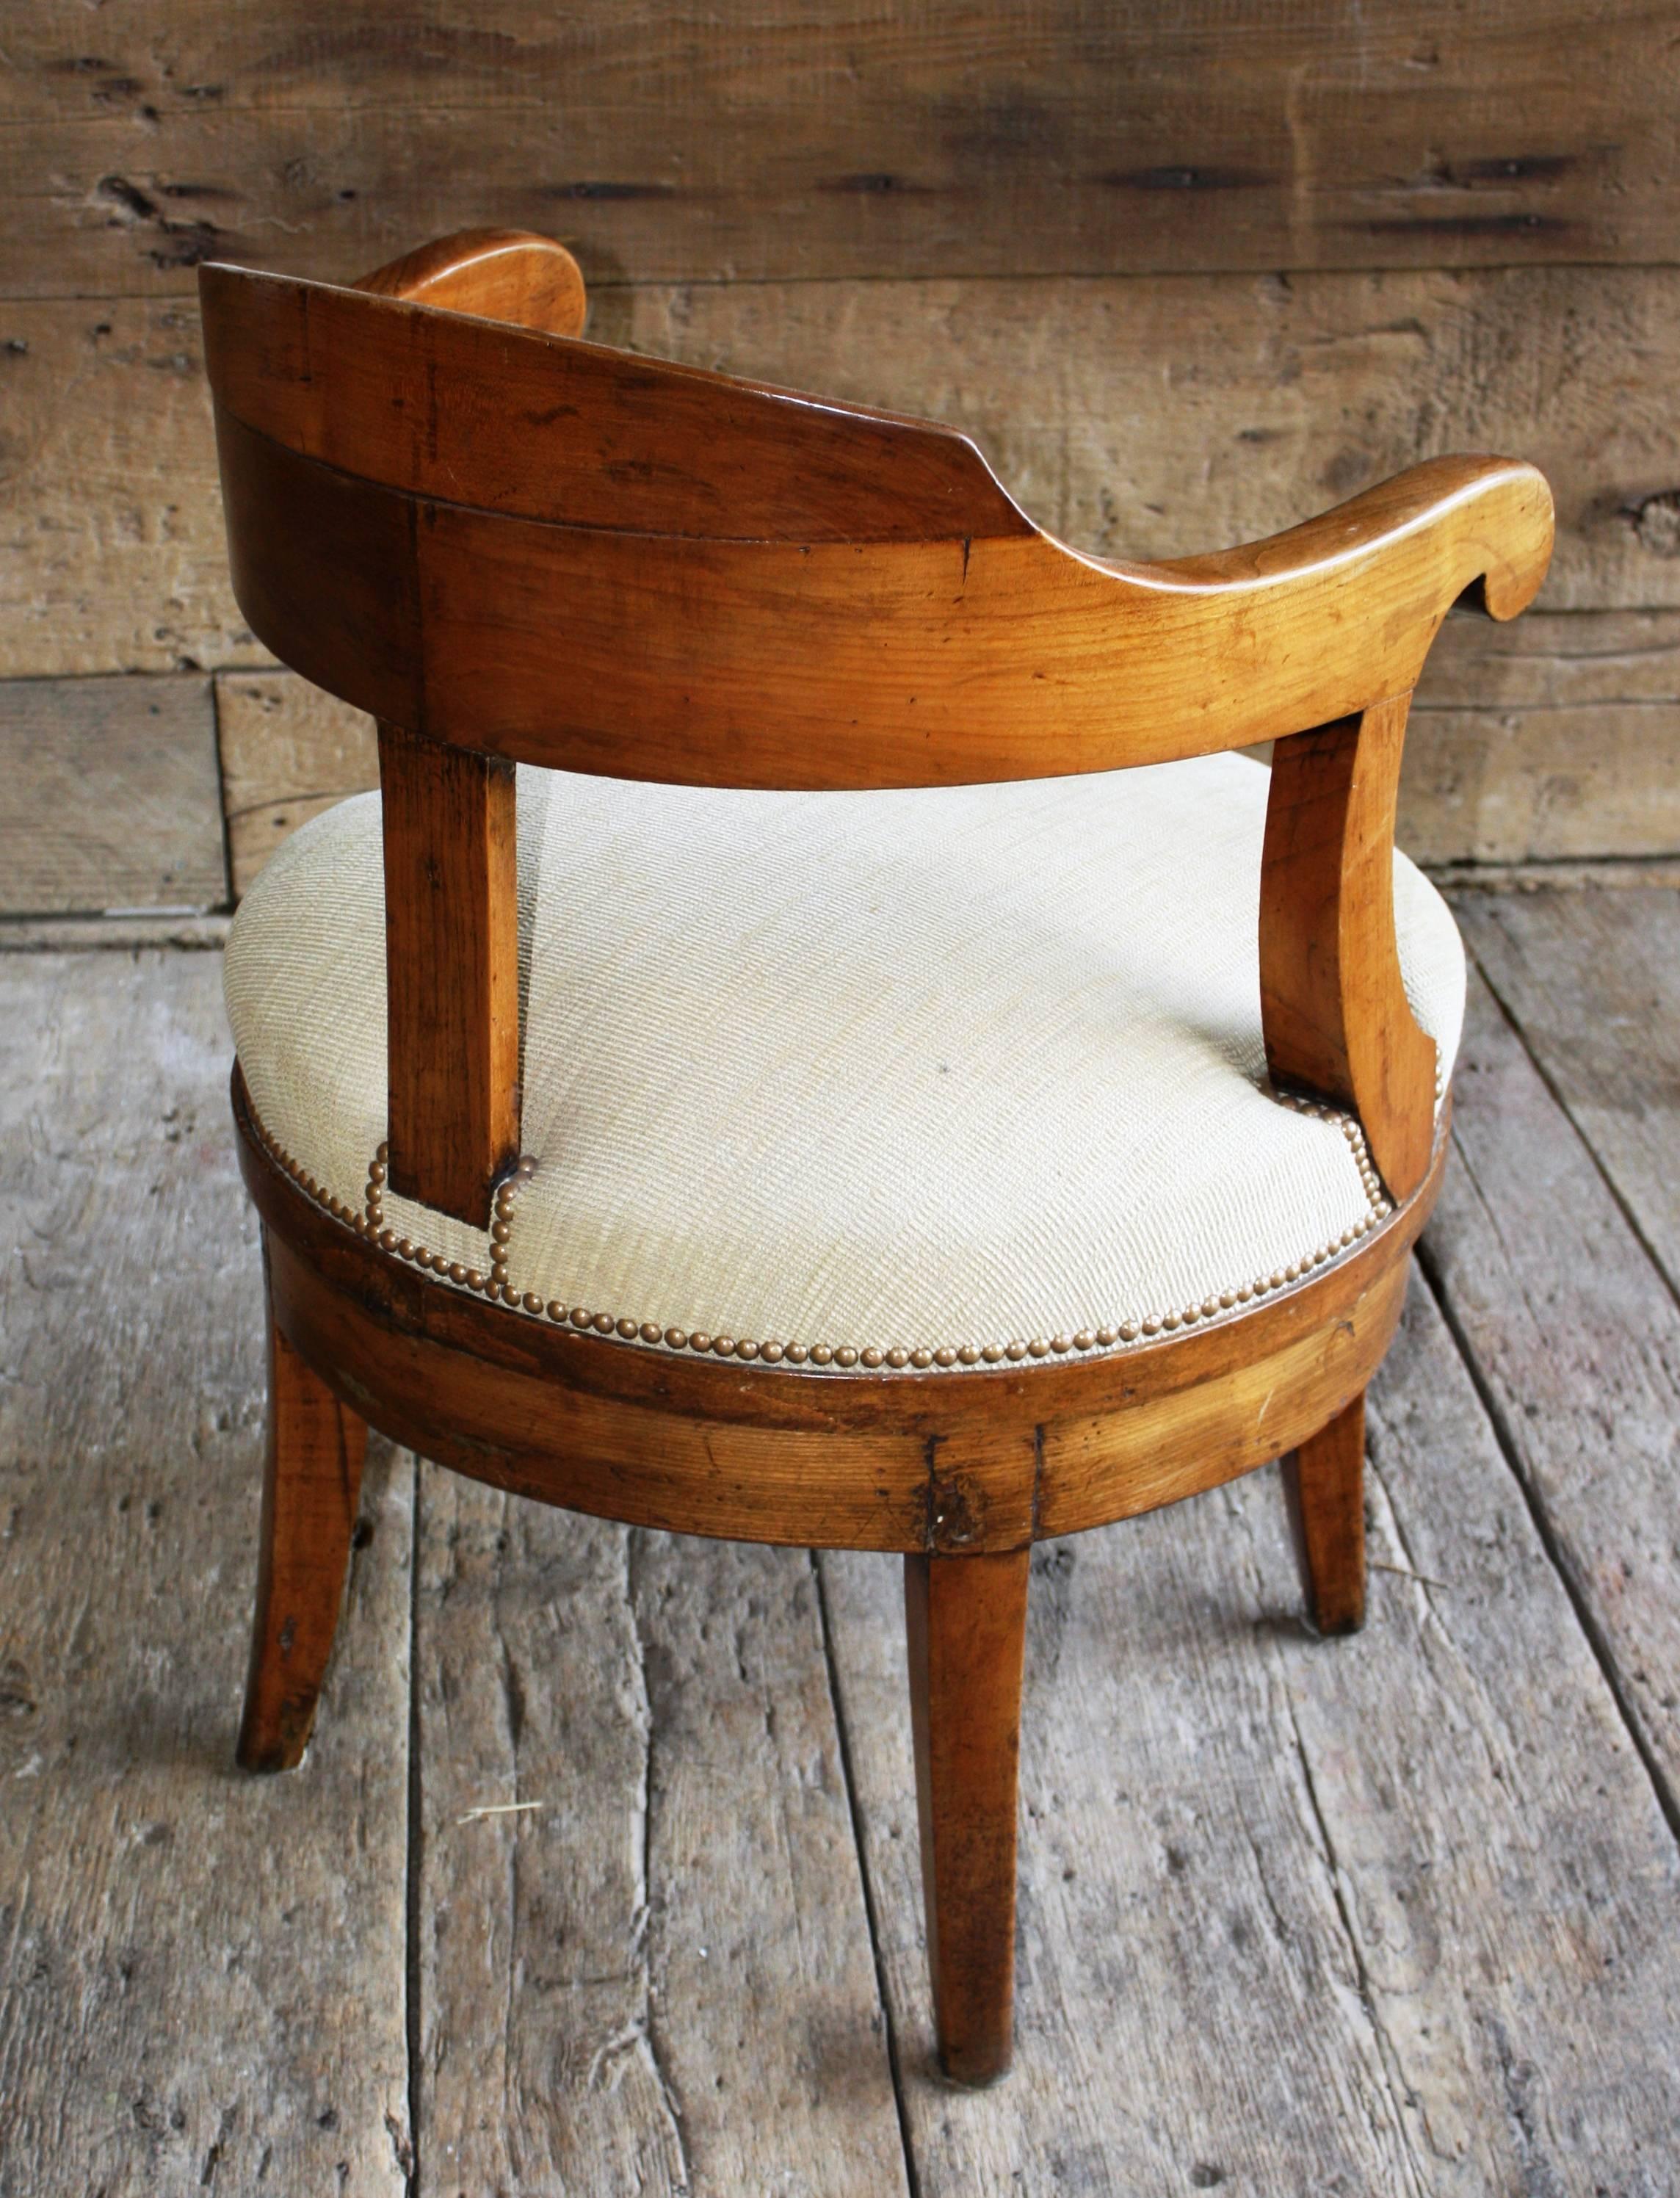 A nice French Empire period revolving desk chair, yoke-back design in cherrywood, circa 1810, newly upholstered.